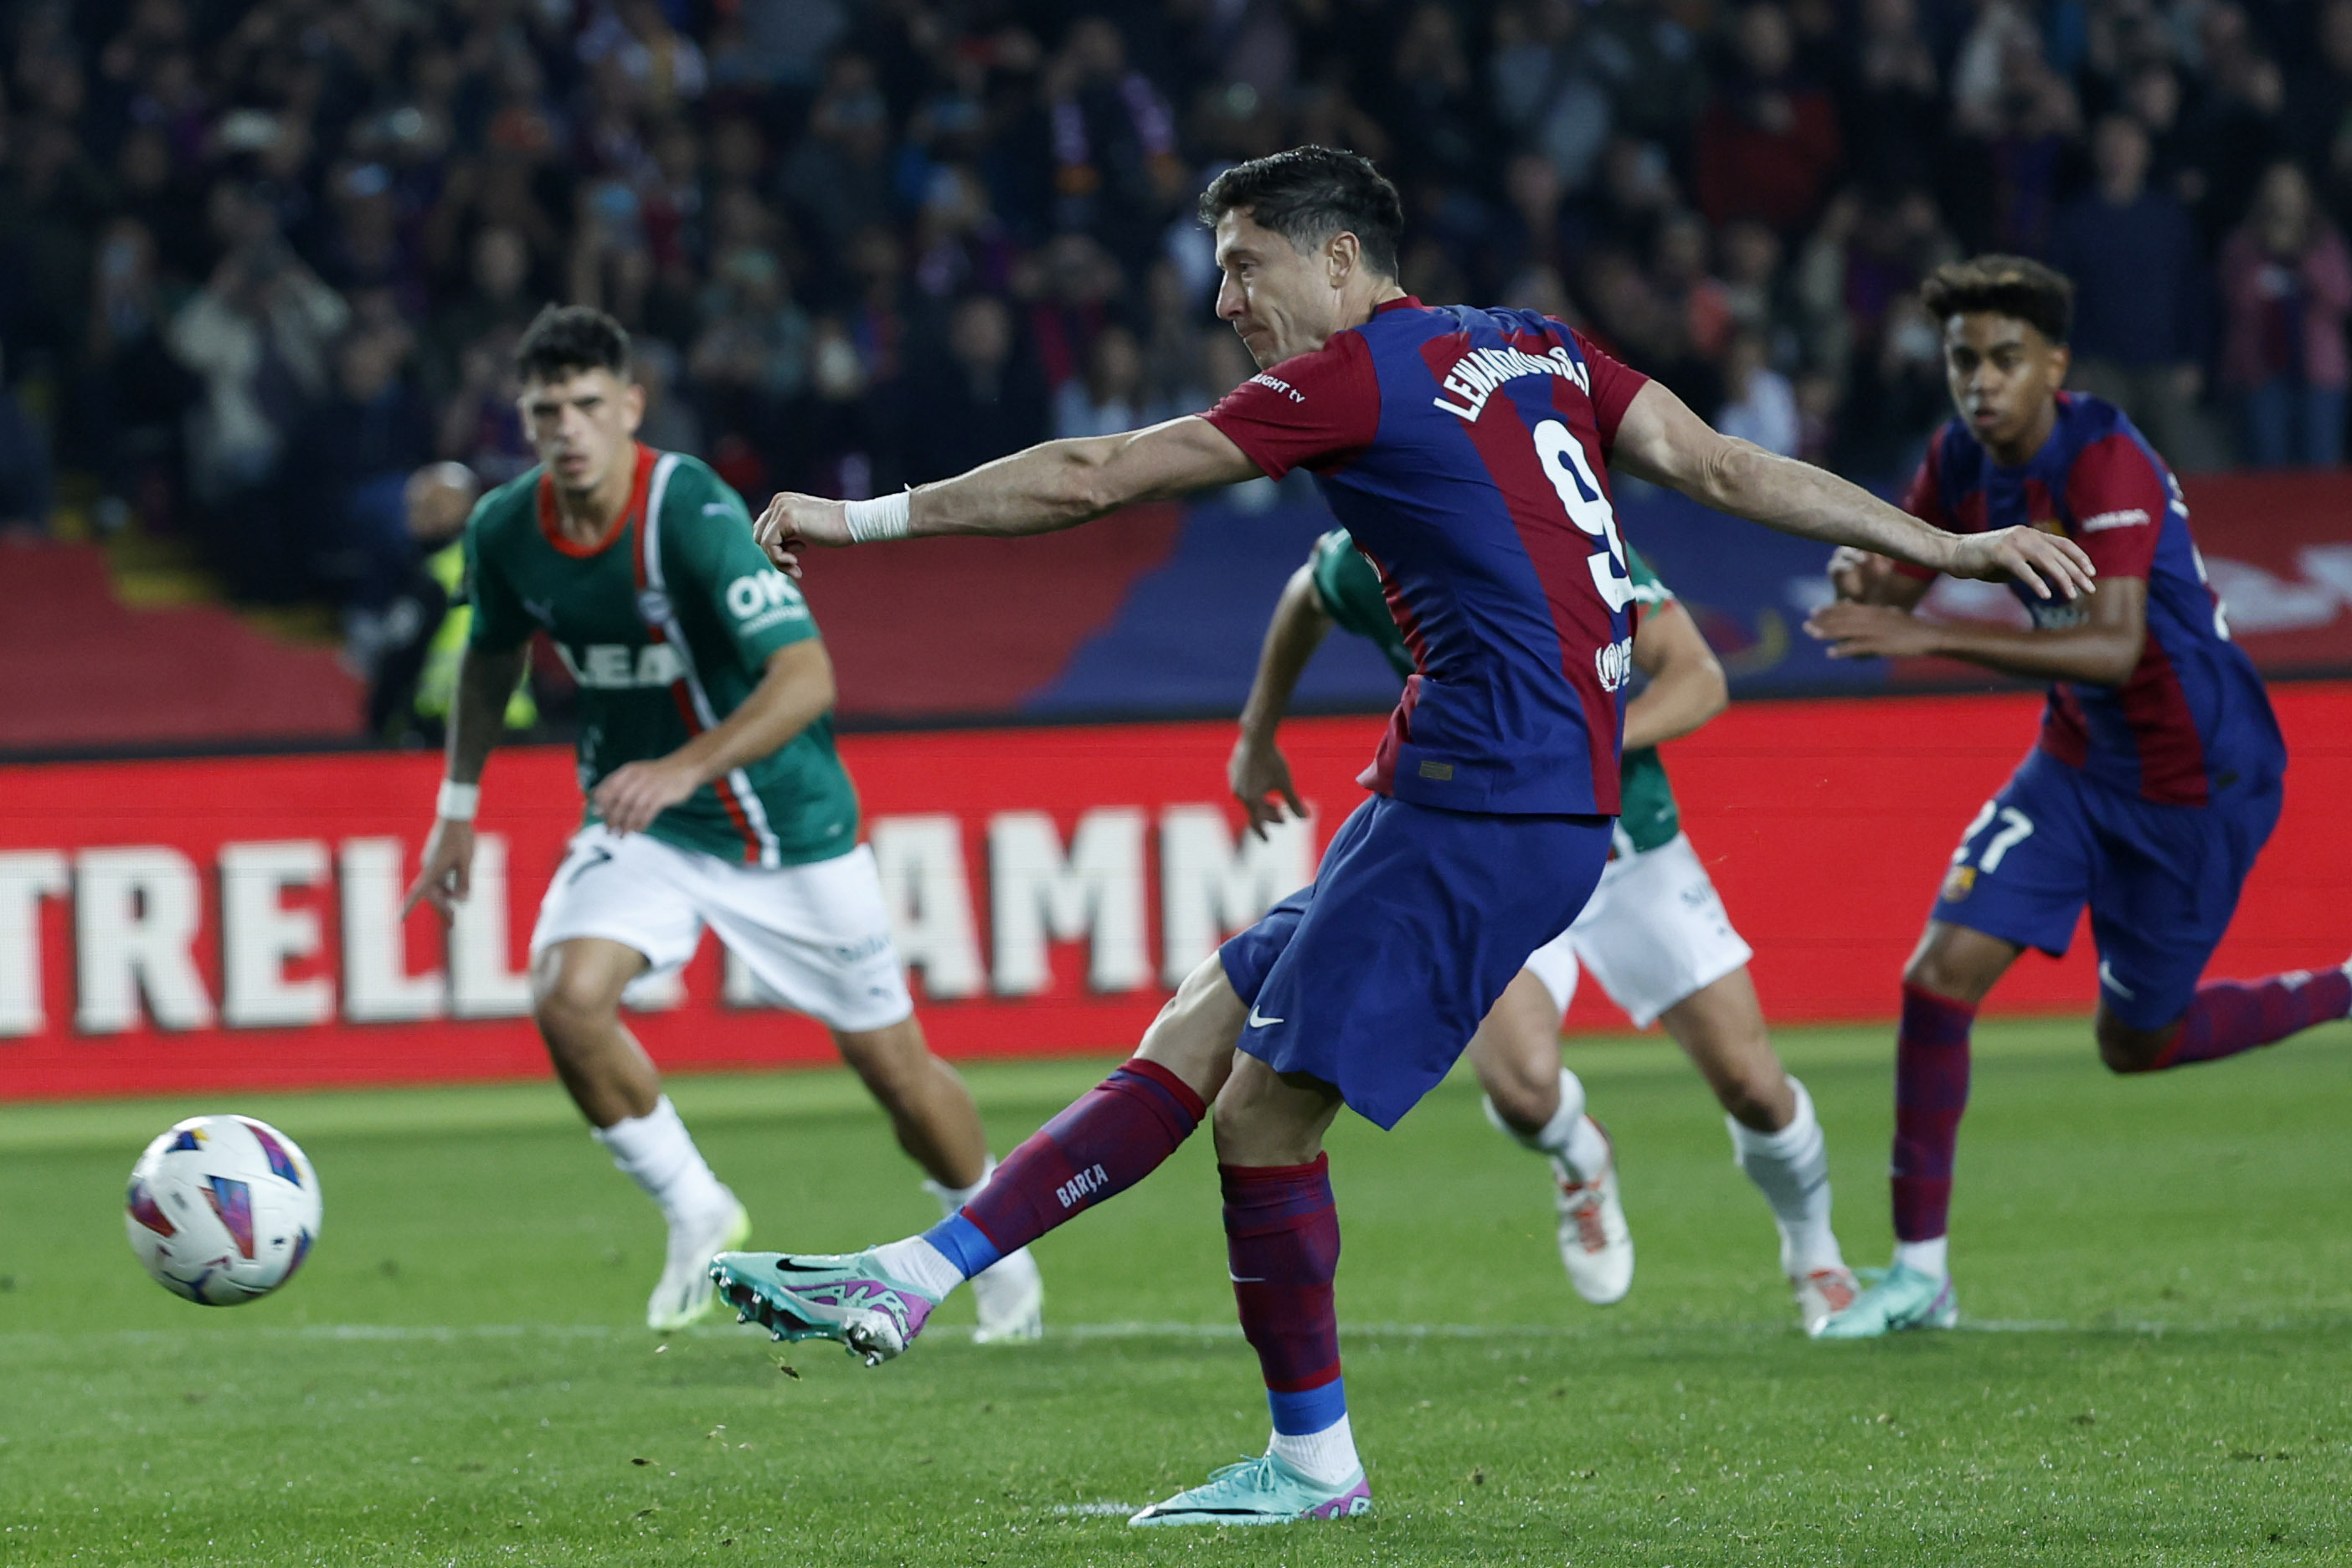 Barcelona’s Robert Lewandowski scores from the spot to secure victory over Alaves